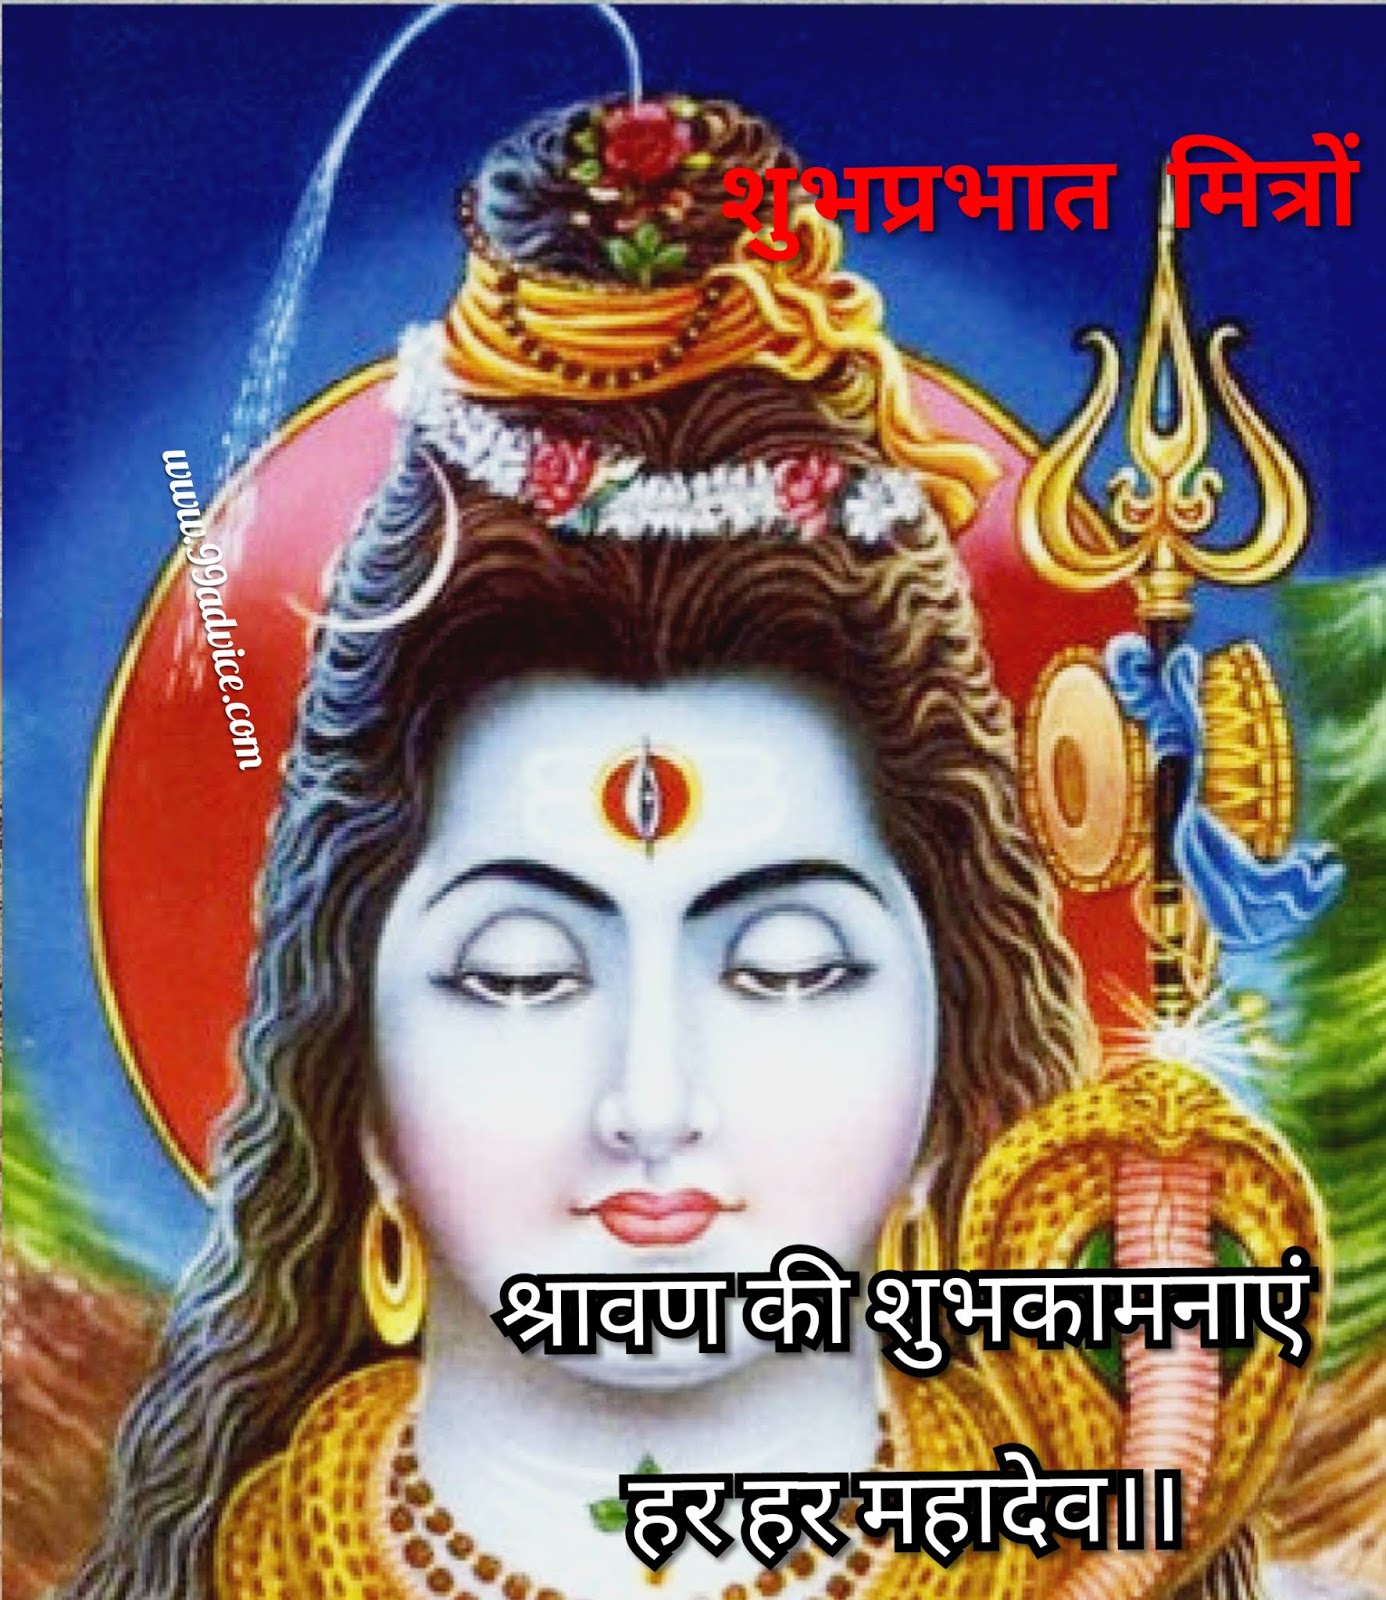 Lord Shiva 2023 Whatsapp Images & Quotes Free Download - 99Advice